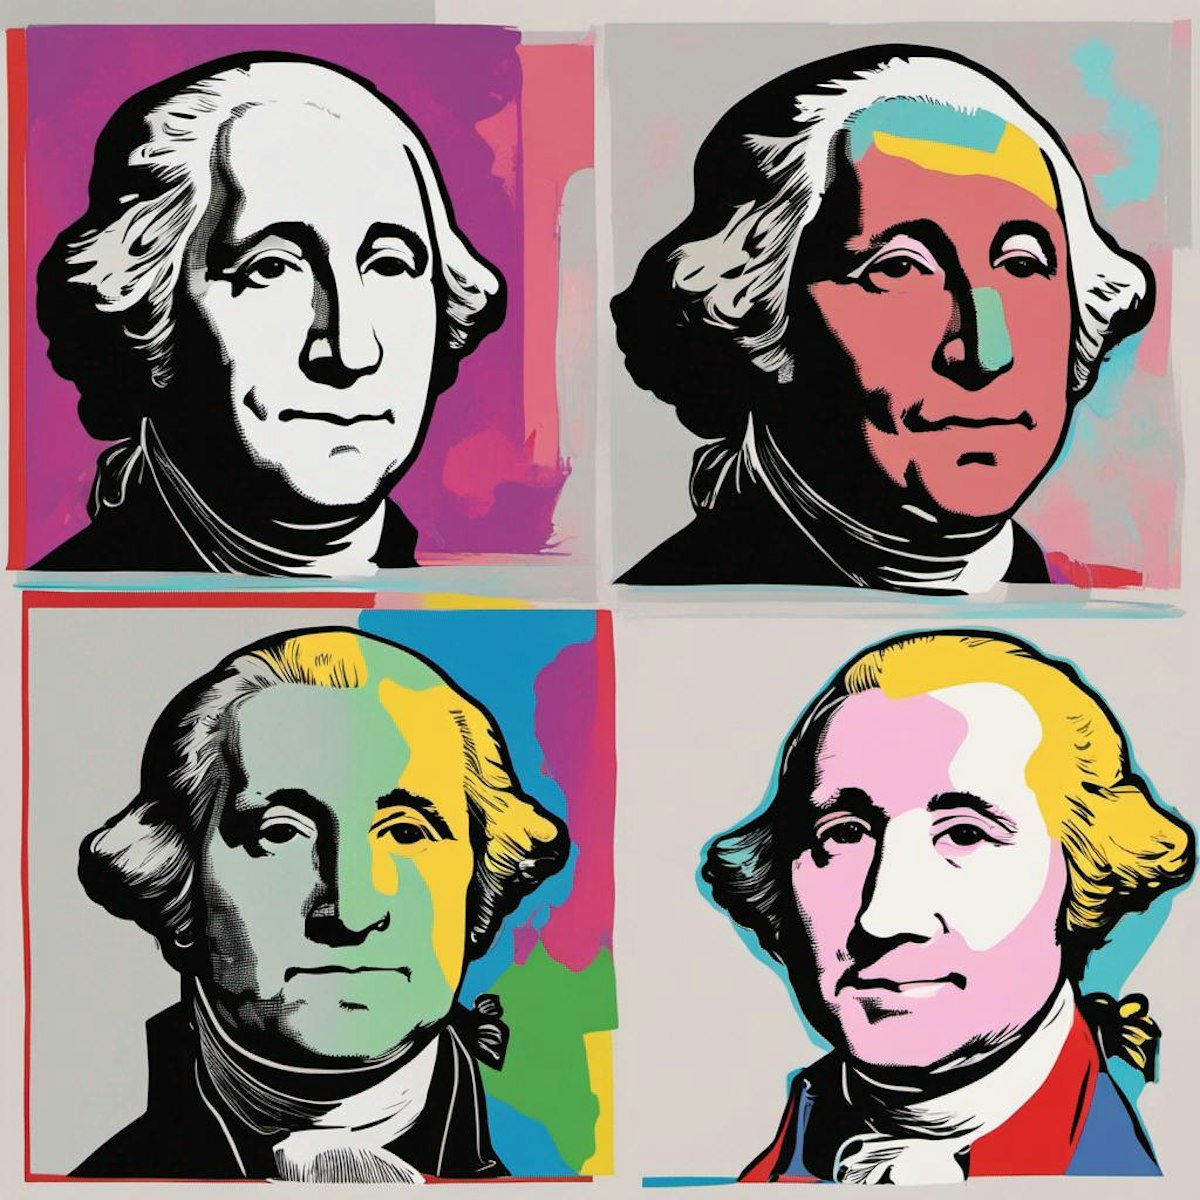 Prompt: A portrait in the style of Andy Warhol of George Washington incredibly detailed